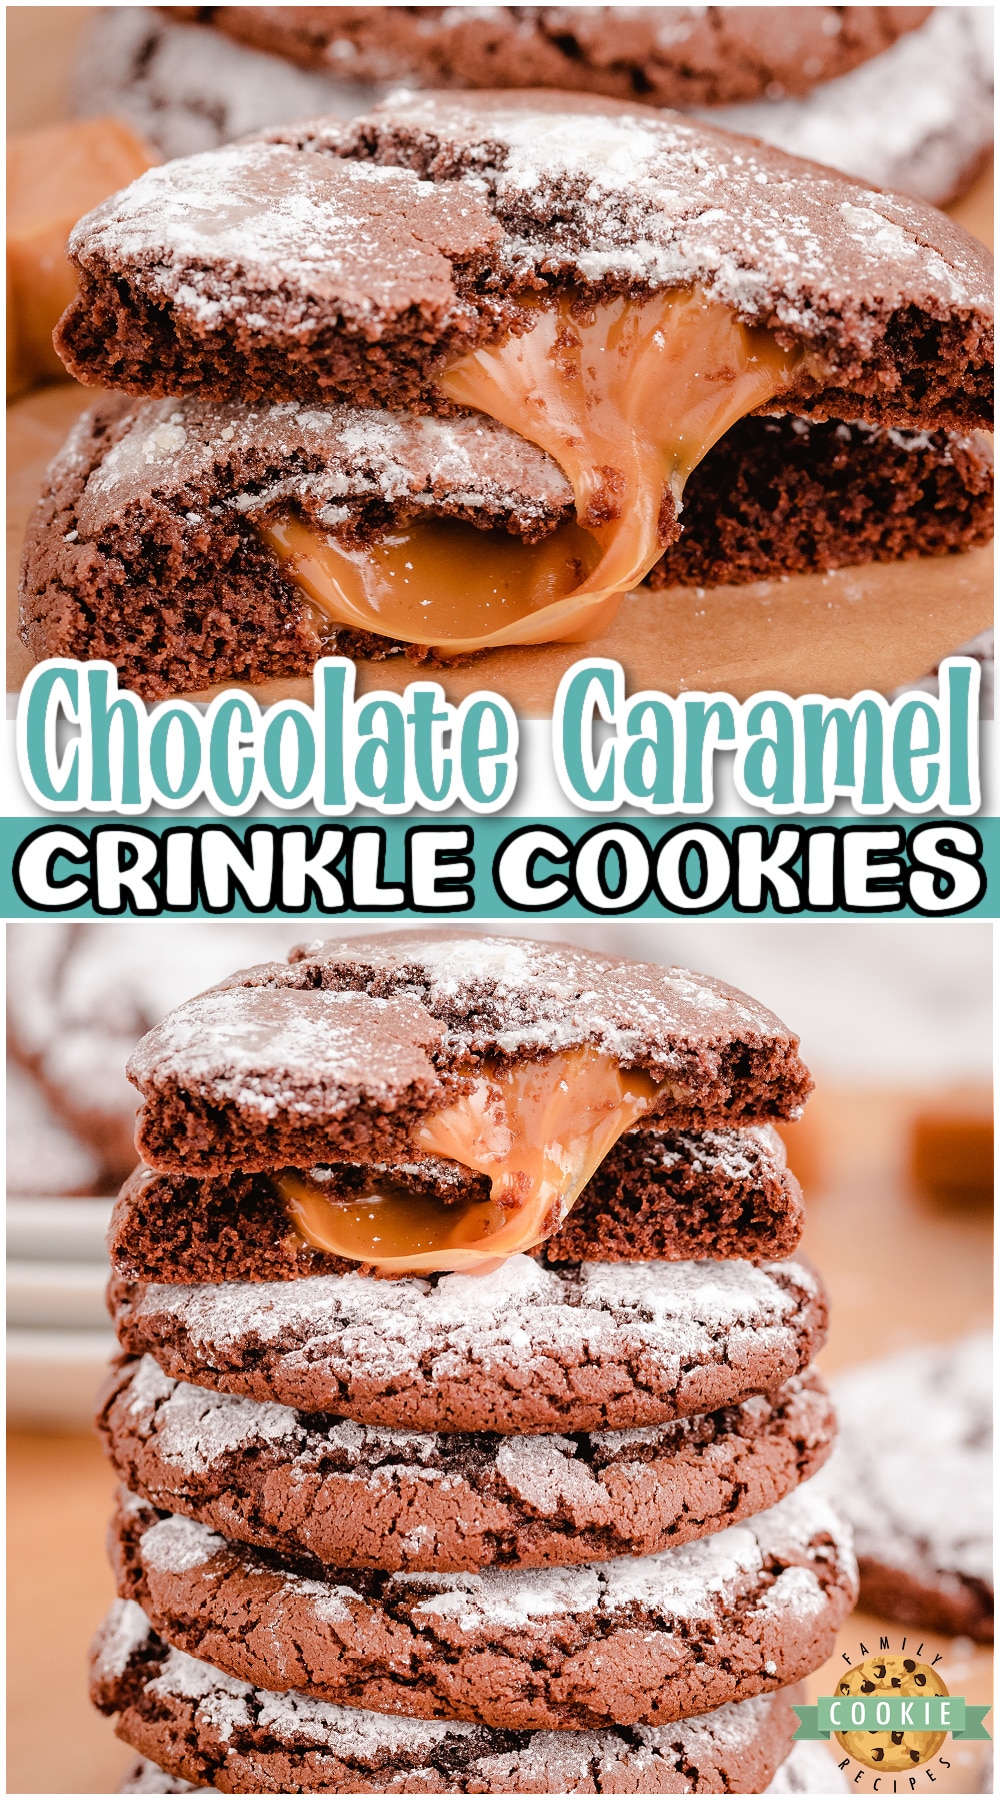 Caramel Chocolate Crinkle Cookies are a decadent combination of chewy caramel and soft chocolate cookies rolled in sweet powdered sugar. Fantastic twist on classic crinkle cookies that everyone loves! via @buttergirls